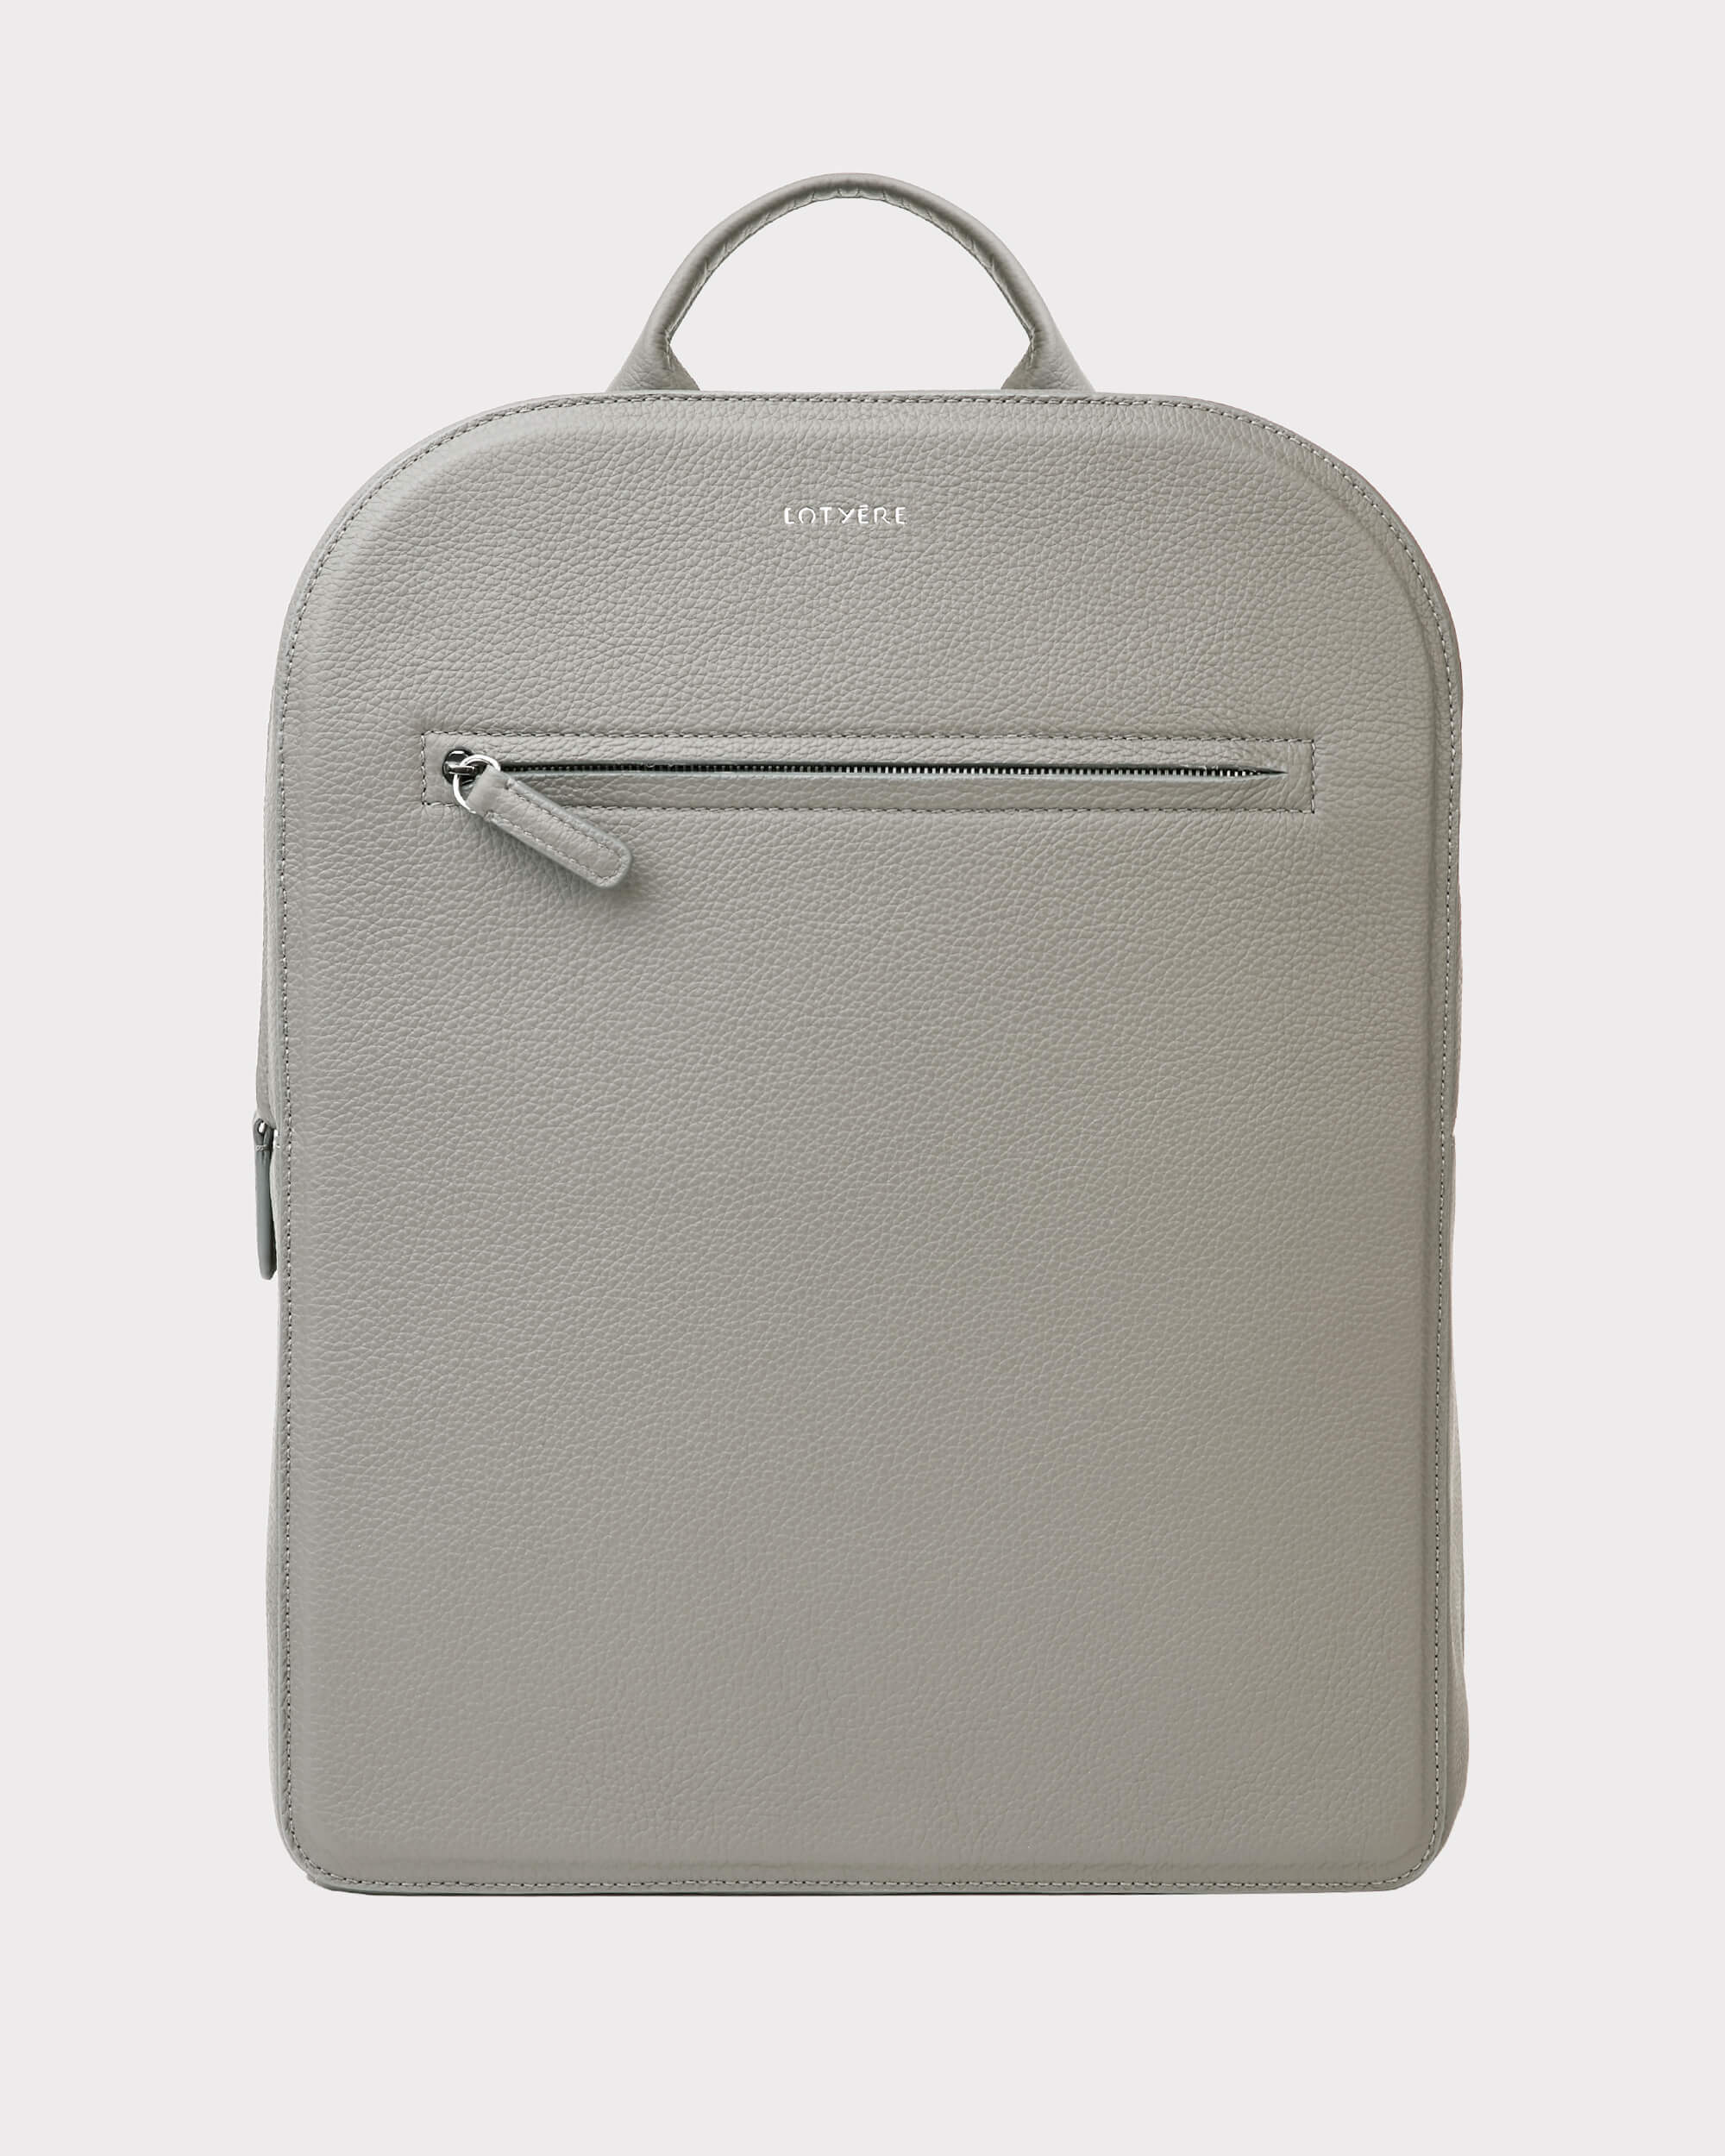 Backpack Casual Light Grey